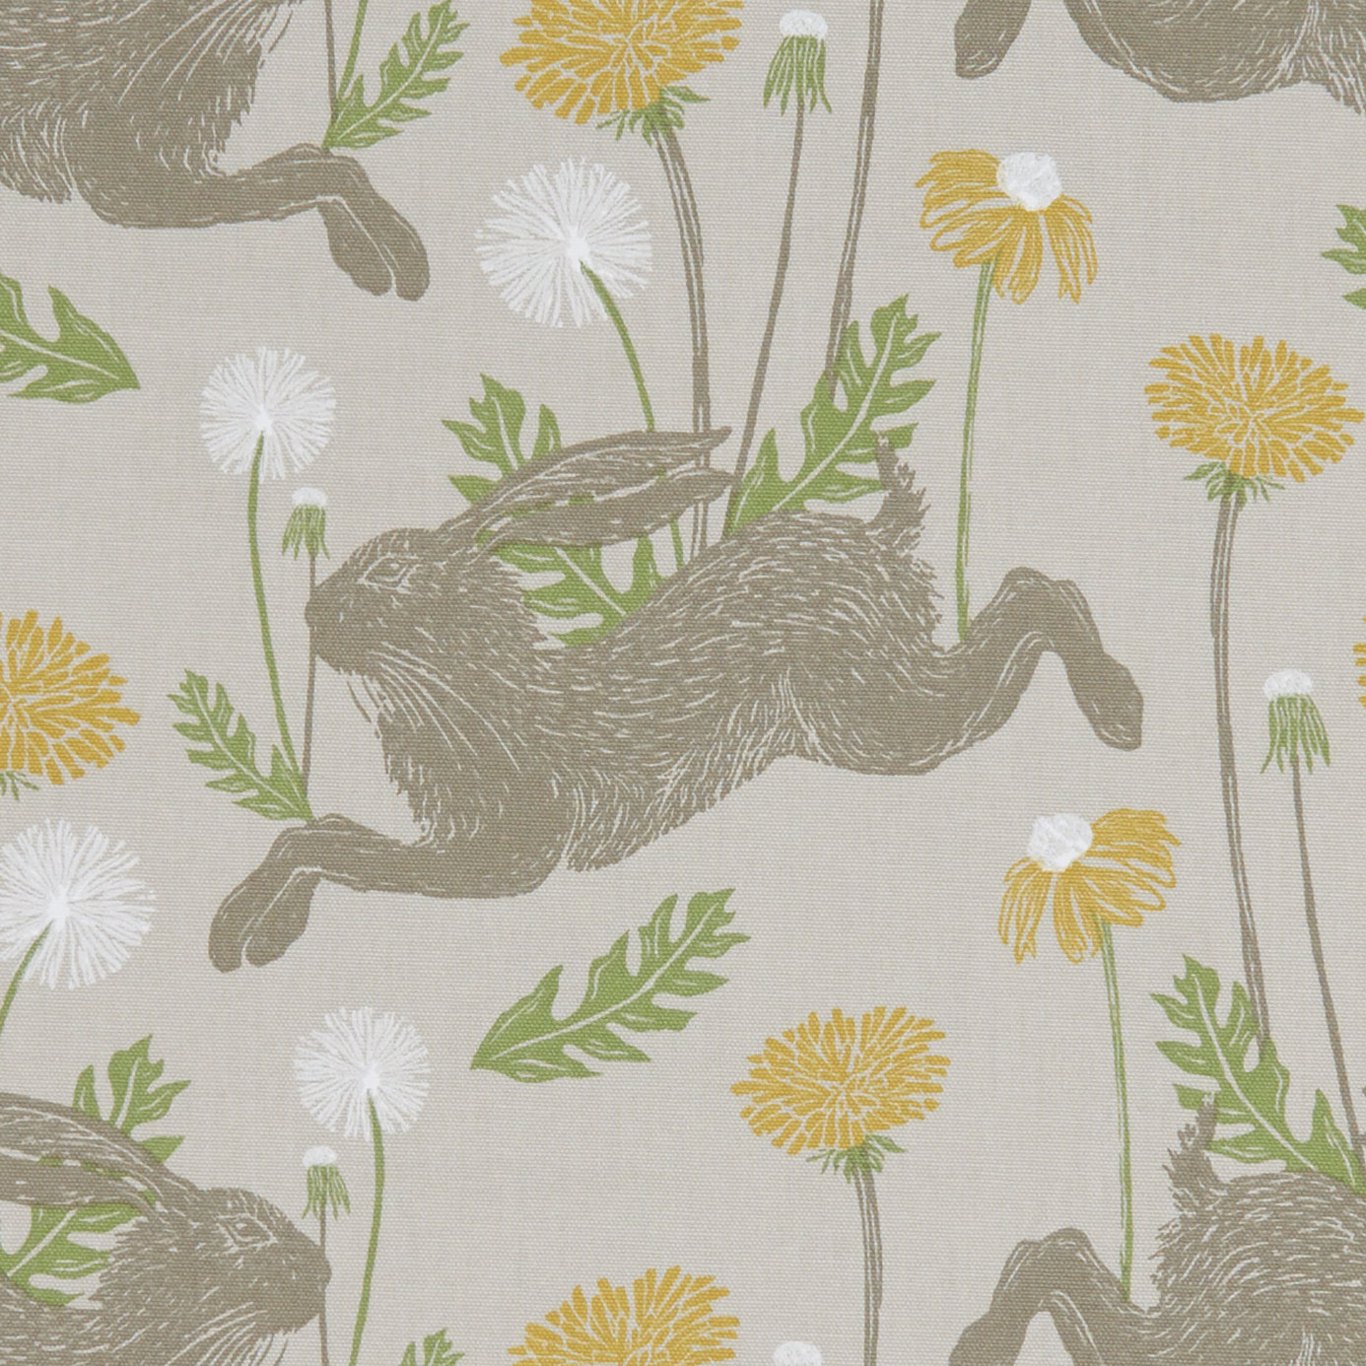 March Hare Hare Linen Fabric by CNC